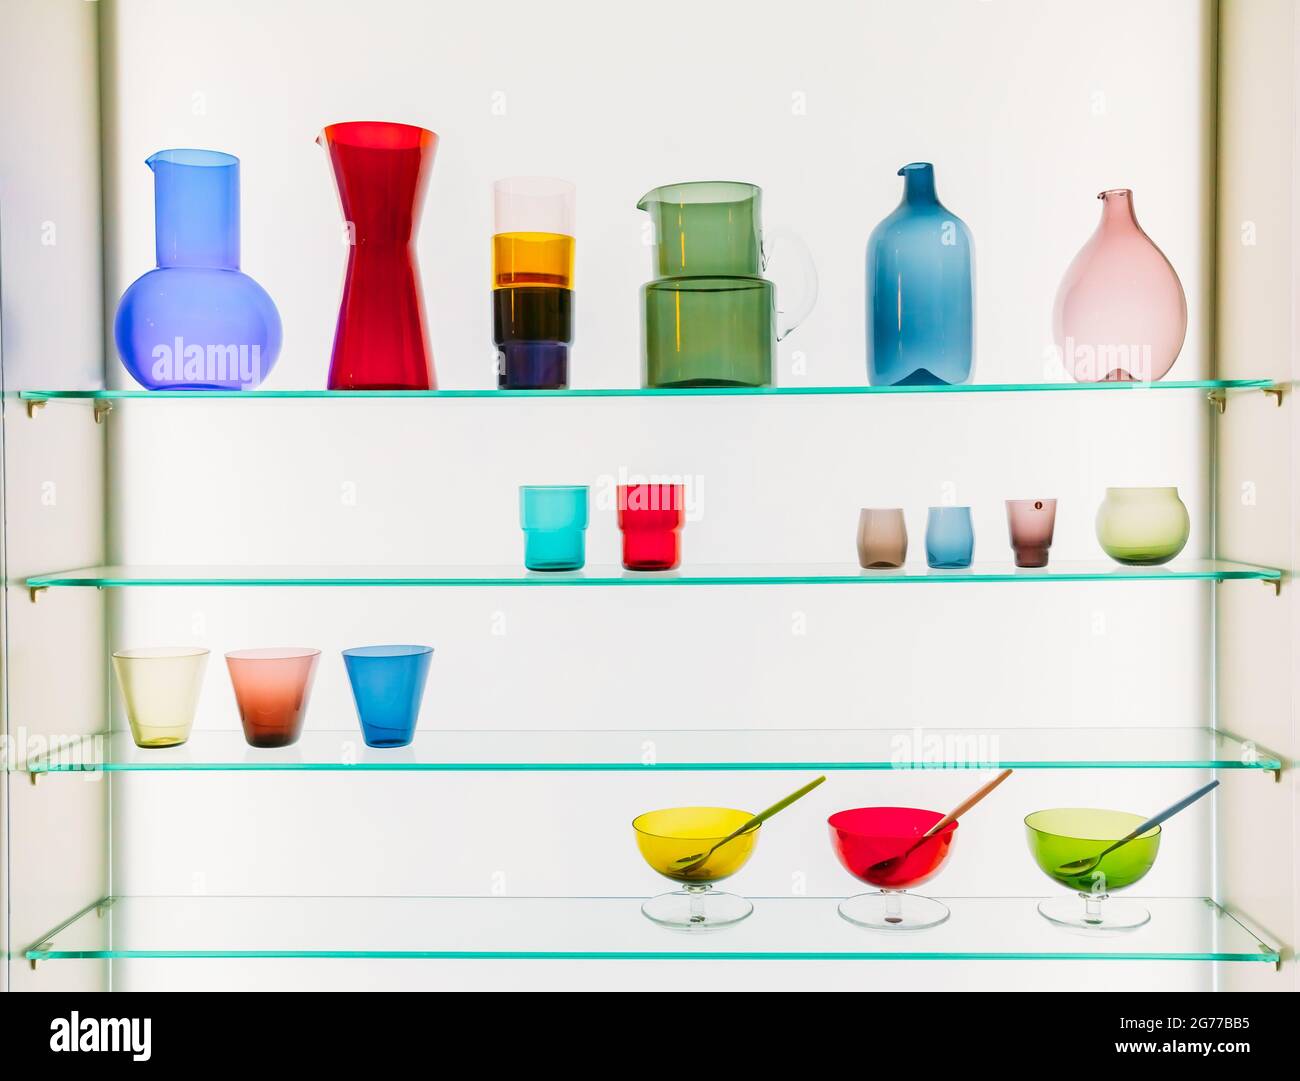 Assorted Different Sizes And Shapes Of Colorful Glassware On Shelves. Vases, Pitchers, Jugs, Glasses. Stock Photo